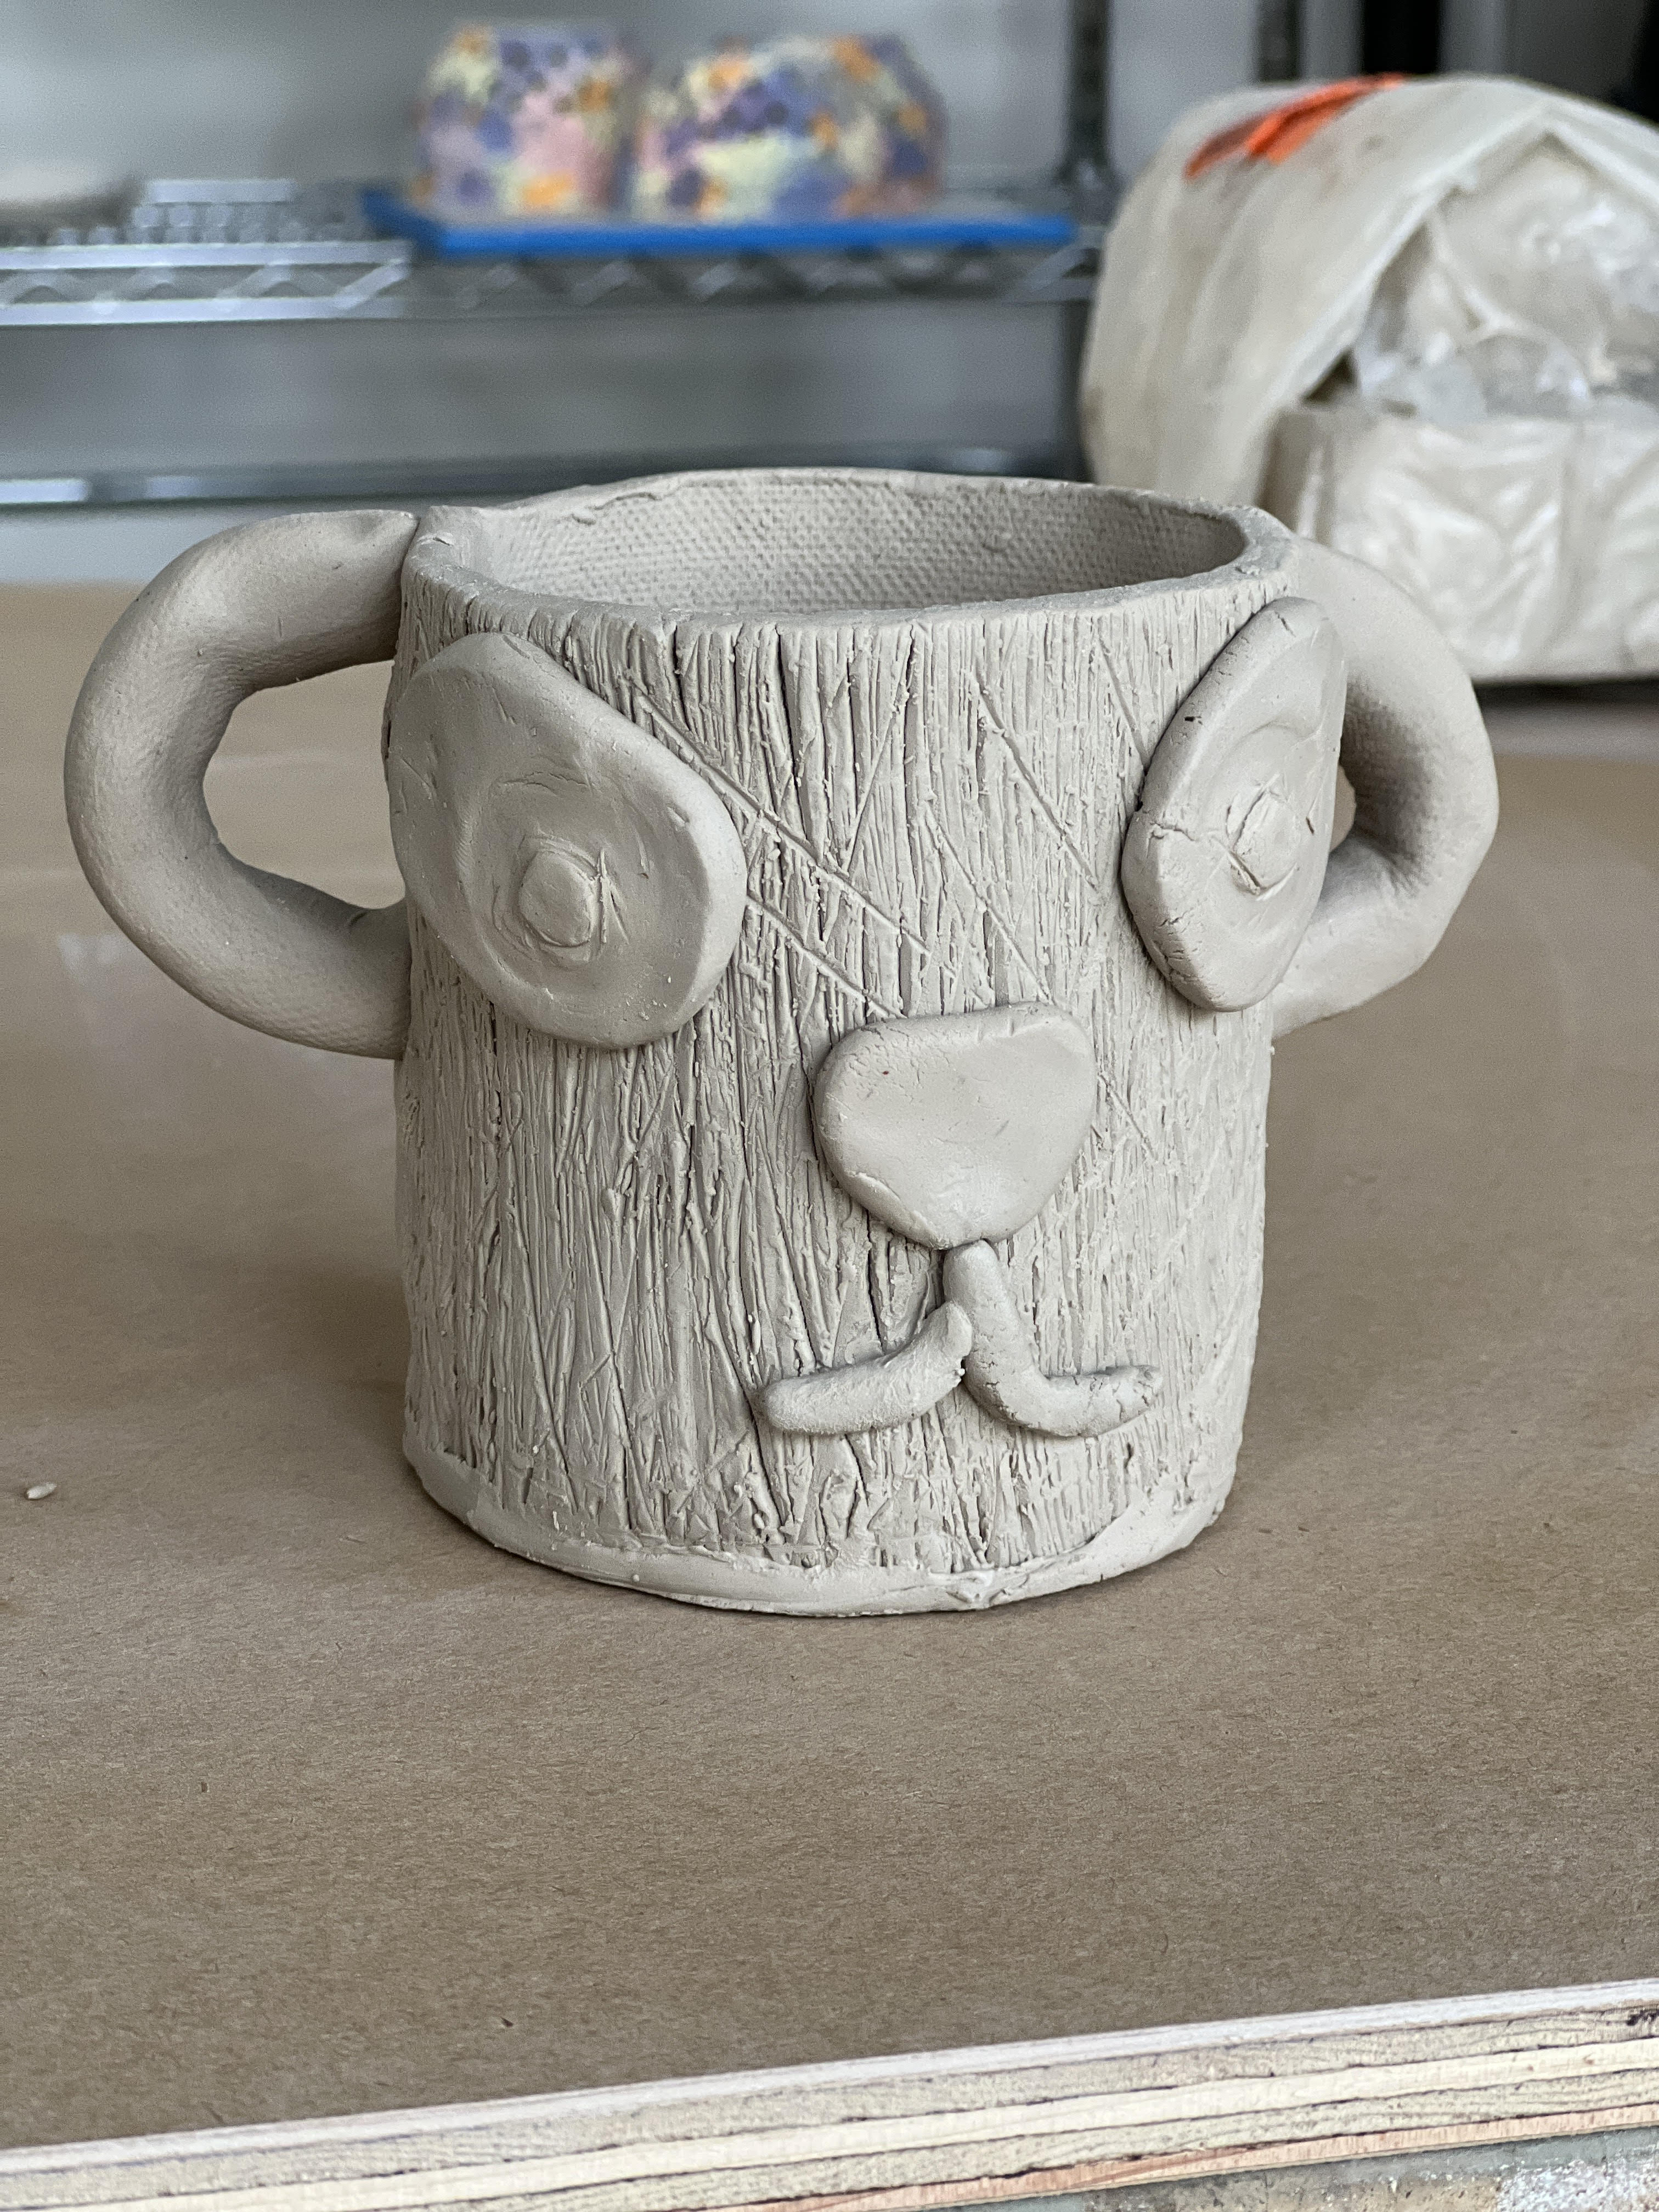 Can anyone help me?I want to make drinkable cups and plates what can I use? ceramic mug or clay?I want to start this as hobby but I don't know what to  buy 